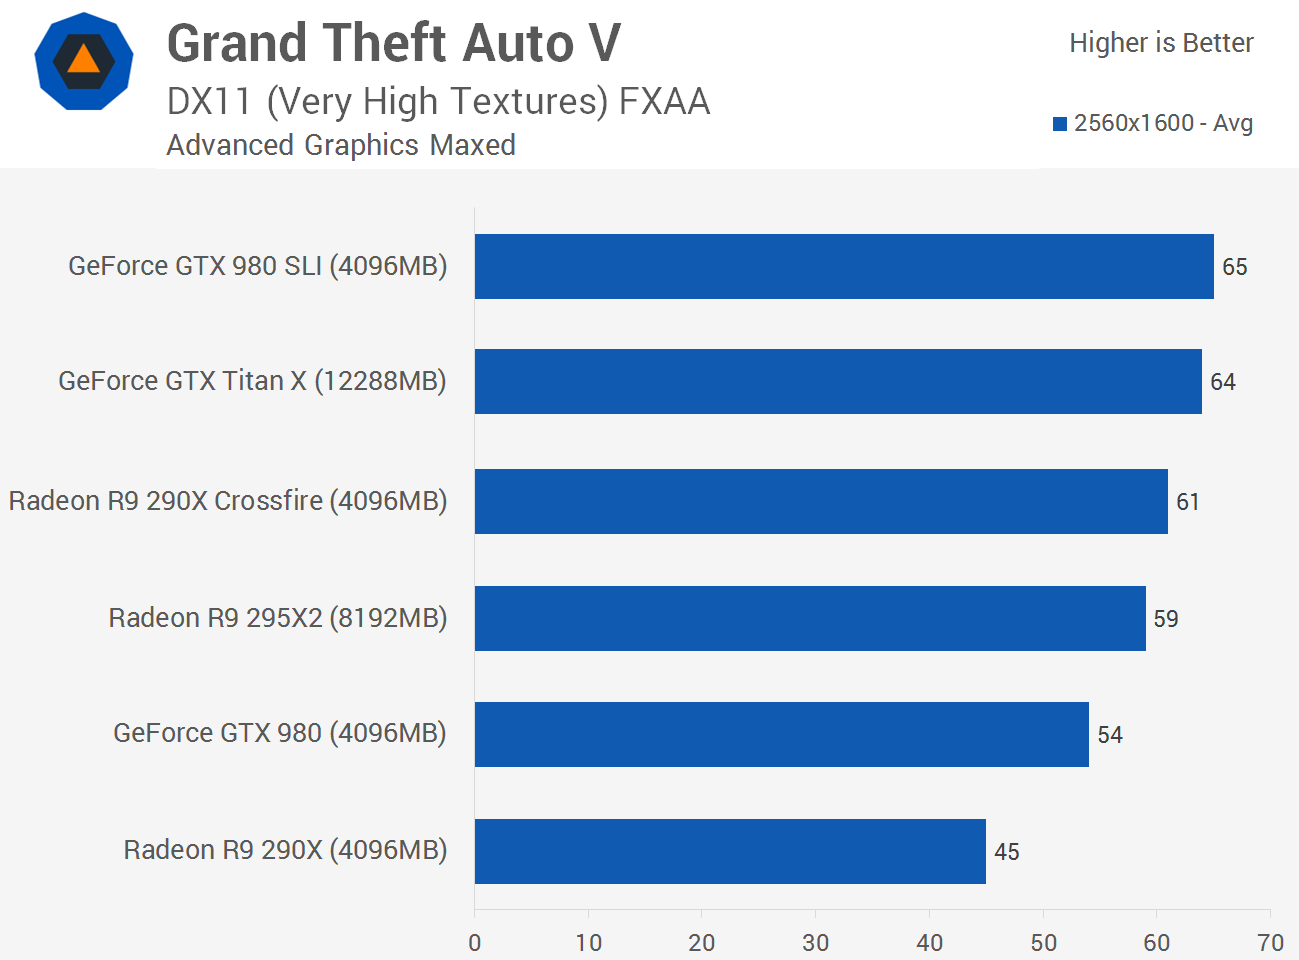 Grand Theft Auto V Benchmarked: Pushing PC Graphics To The Limit